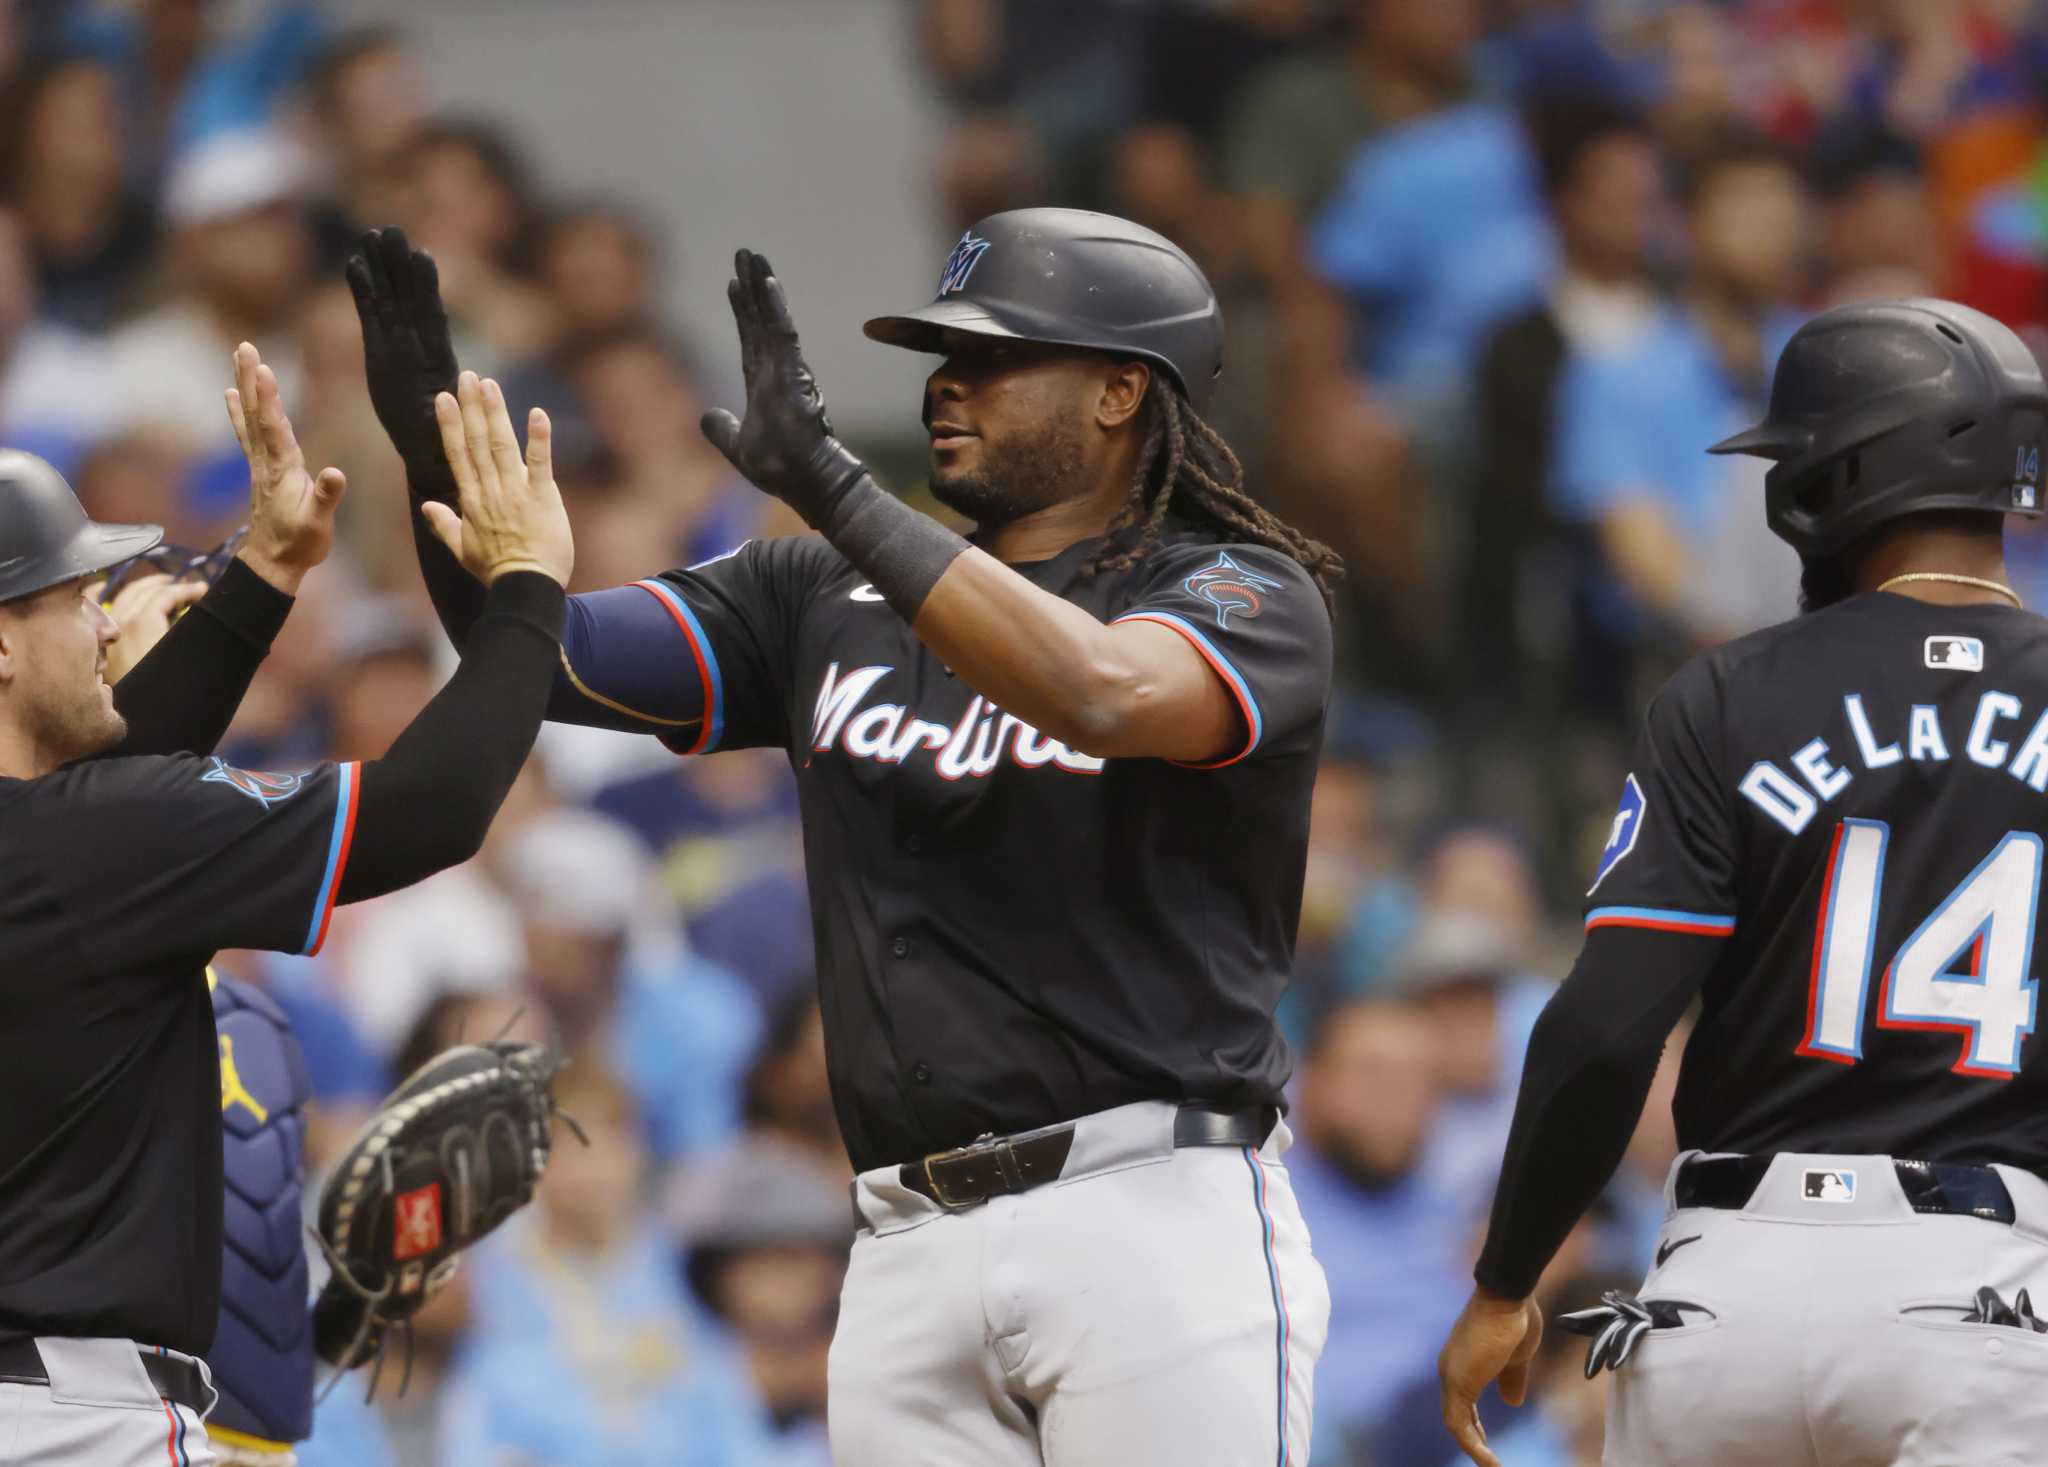 Bell's 3-run homer in 7th inning helps lift Marlins past Brewers 7-3